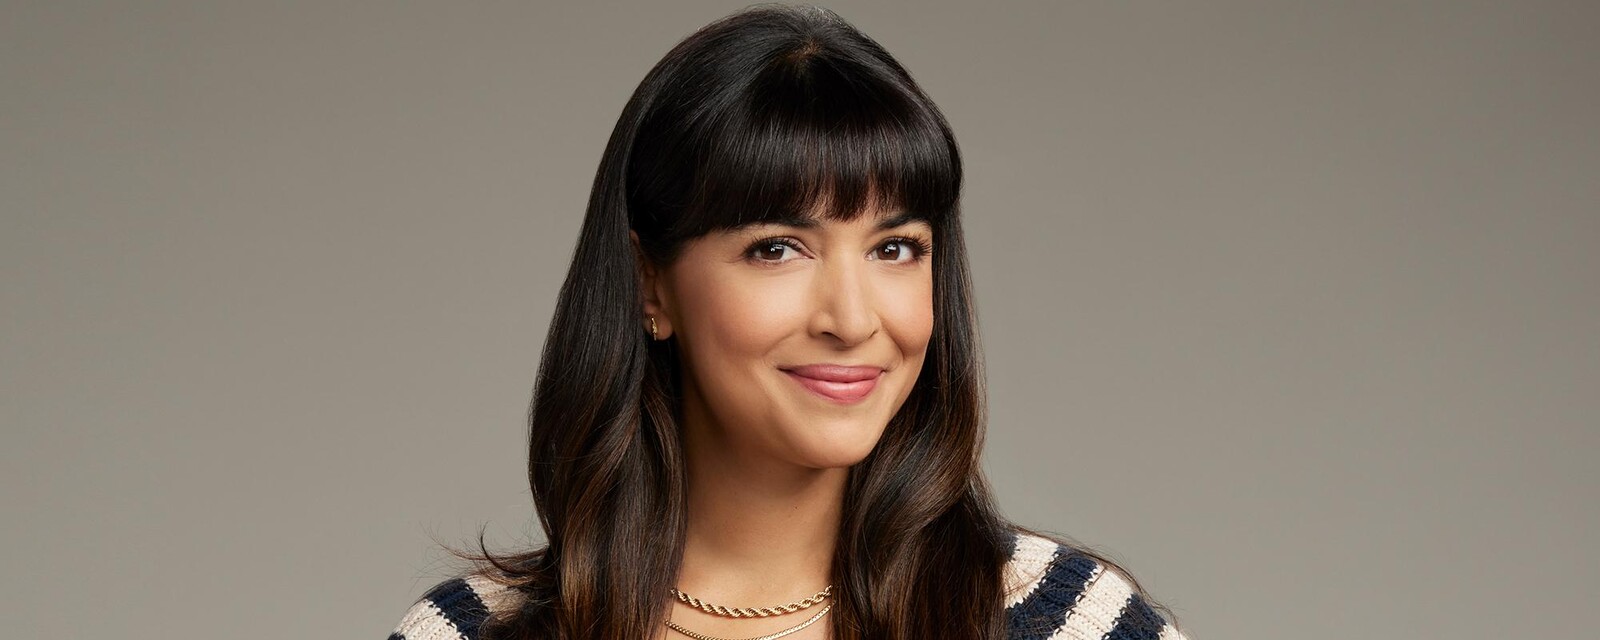 36 Facts About Hannah Simone - Facts.net